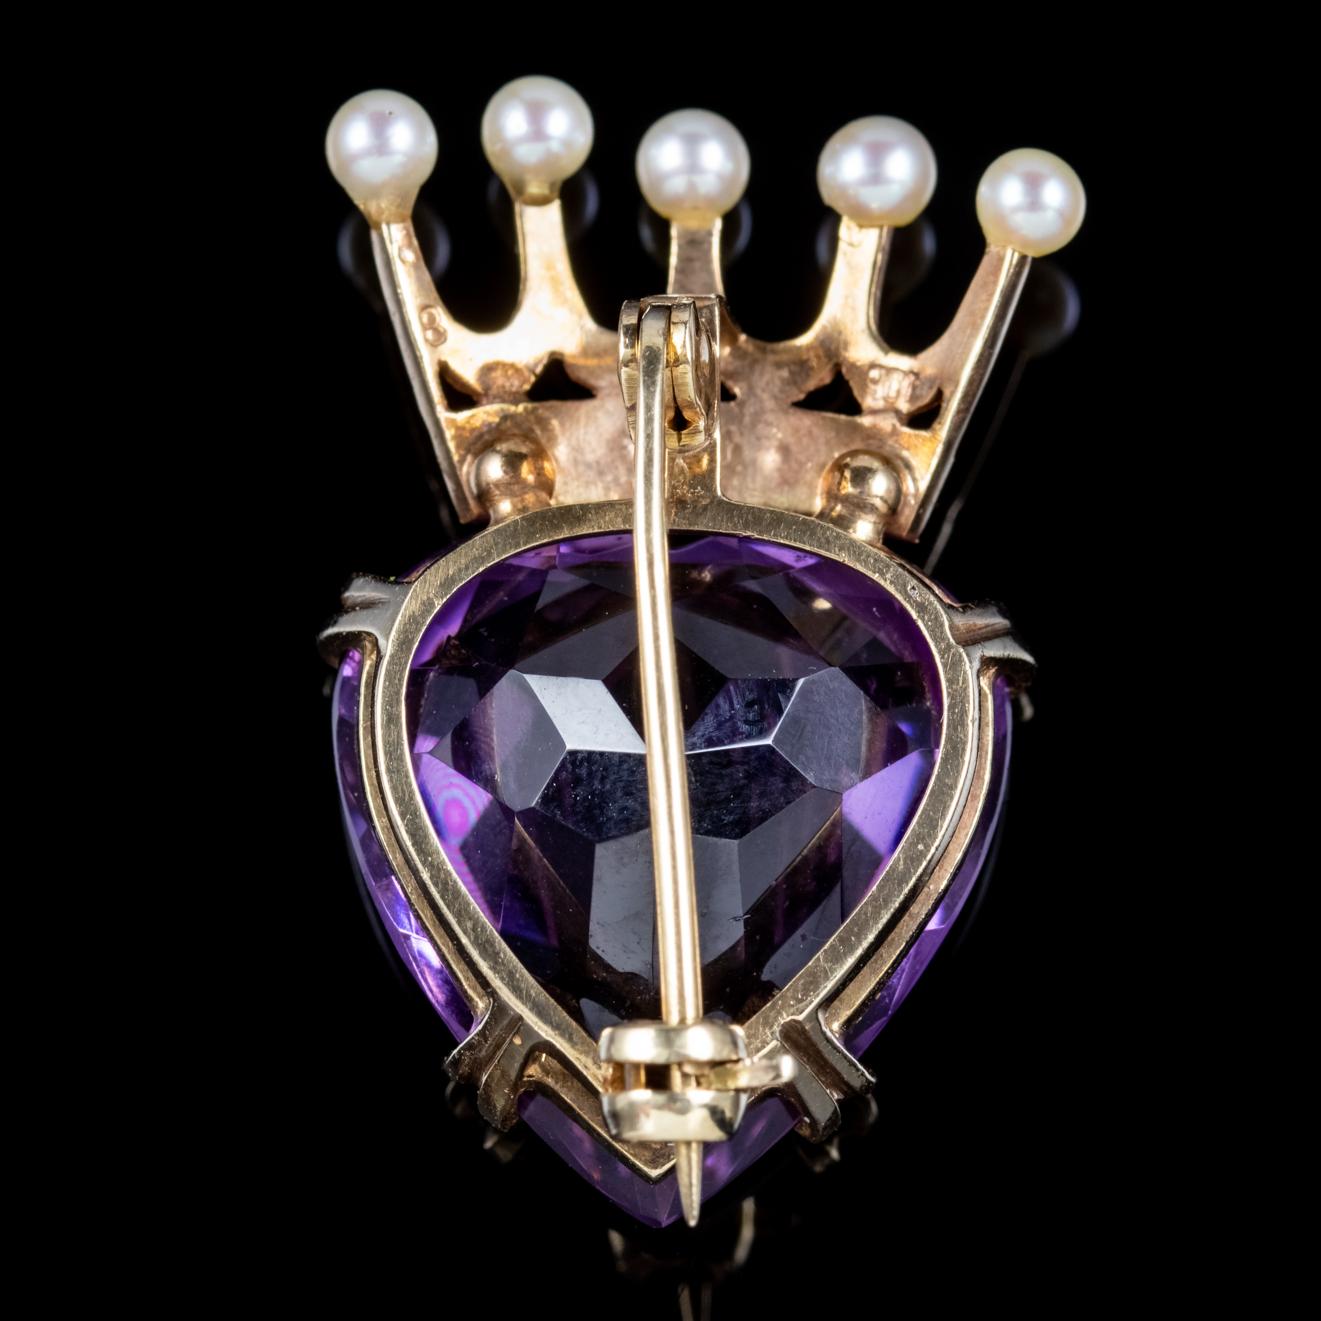 A beautiful antique Victorian Luckenbooth brooch featuring an impressive 20ct Amethyst cut in the shape of a heart with a golden crown on top decorated with Pearls. A Luckenbooth is a traditional Scottish love token often given as a wedding gift and